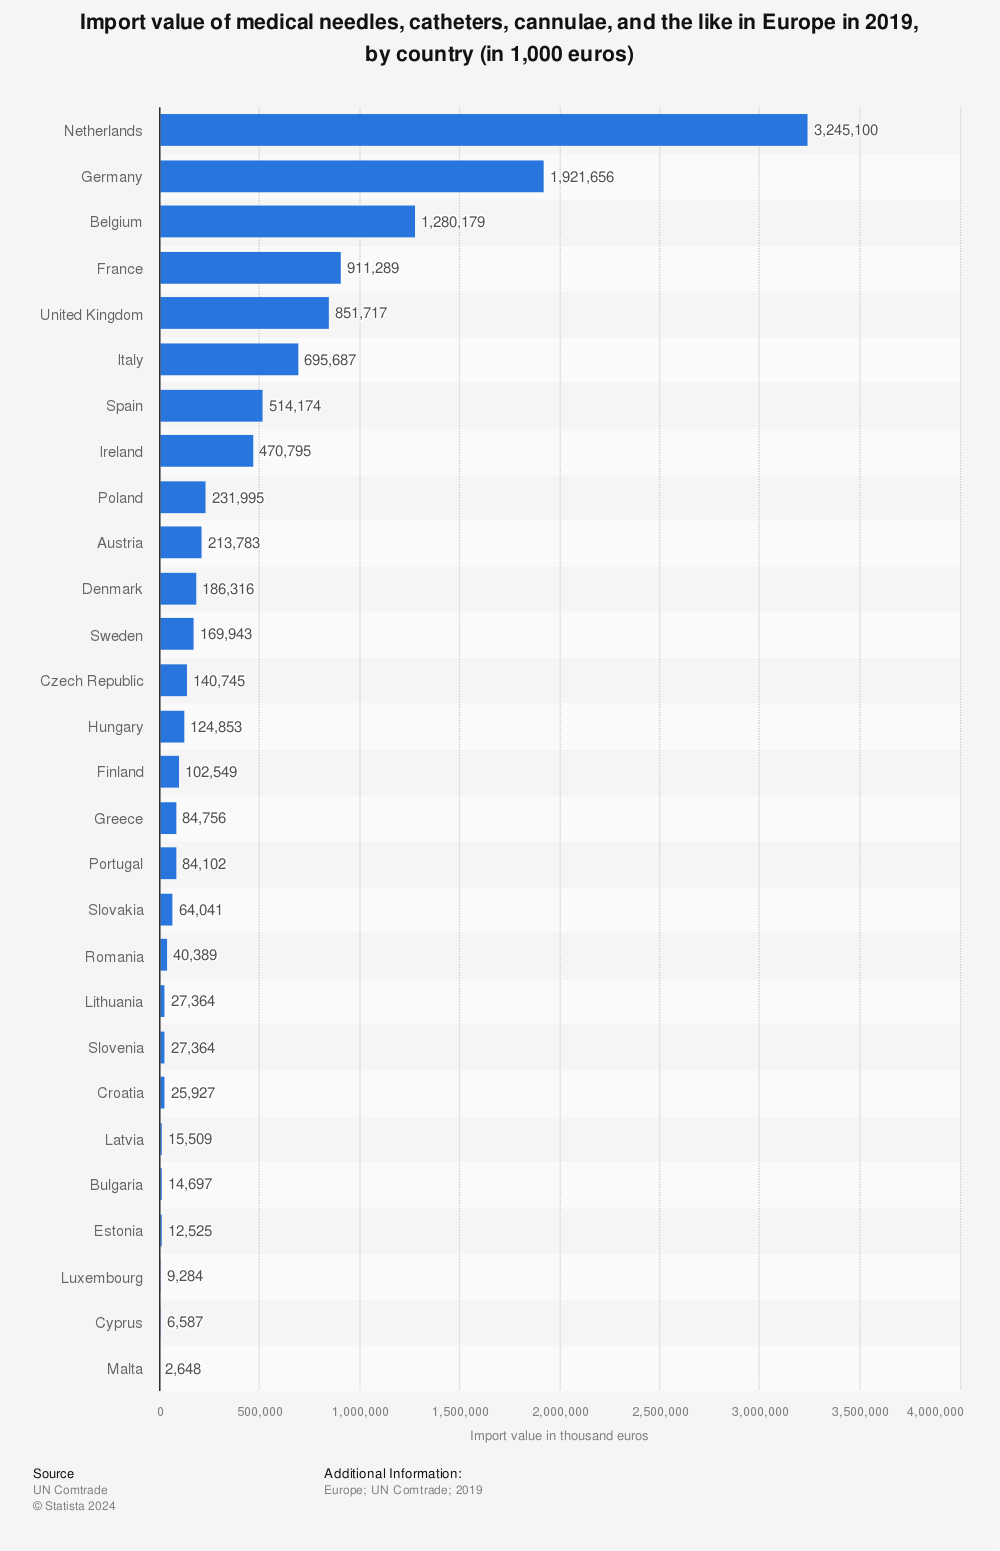 Statistic: Import value of medical needles, catheters, cannulae, and the like in Europe in 2019, by country (in 1,000 euros) | Statista